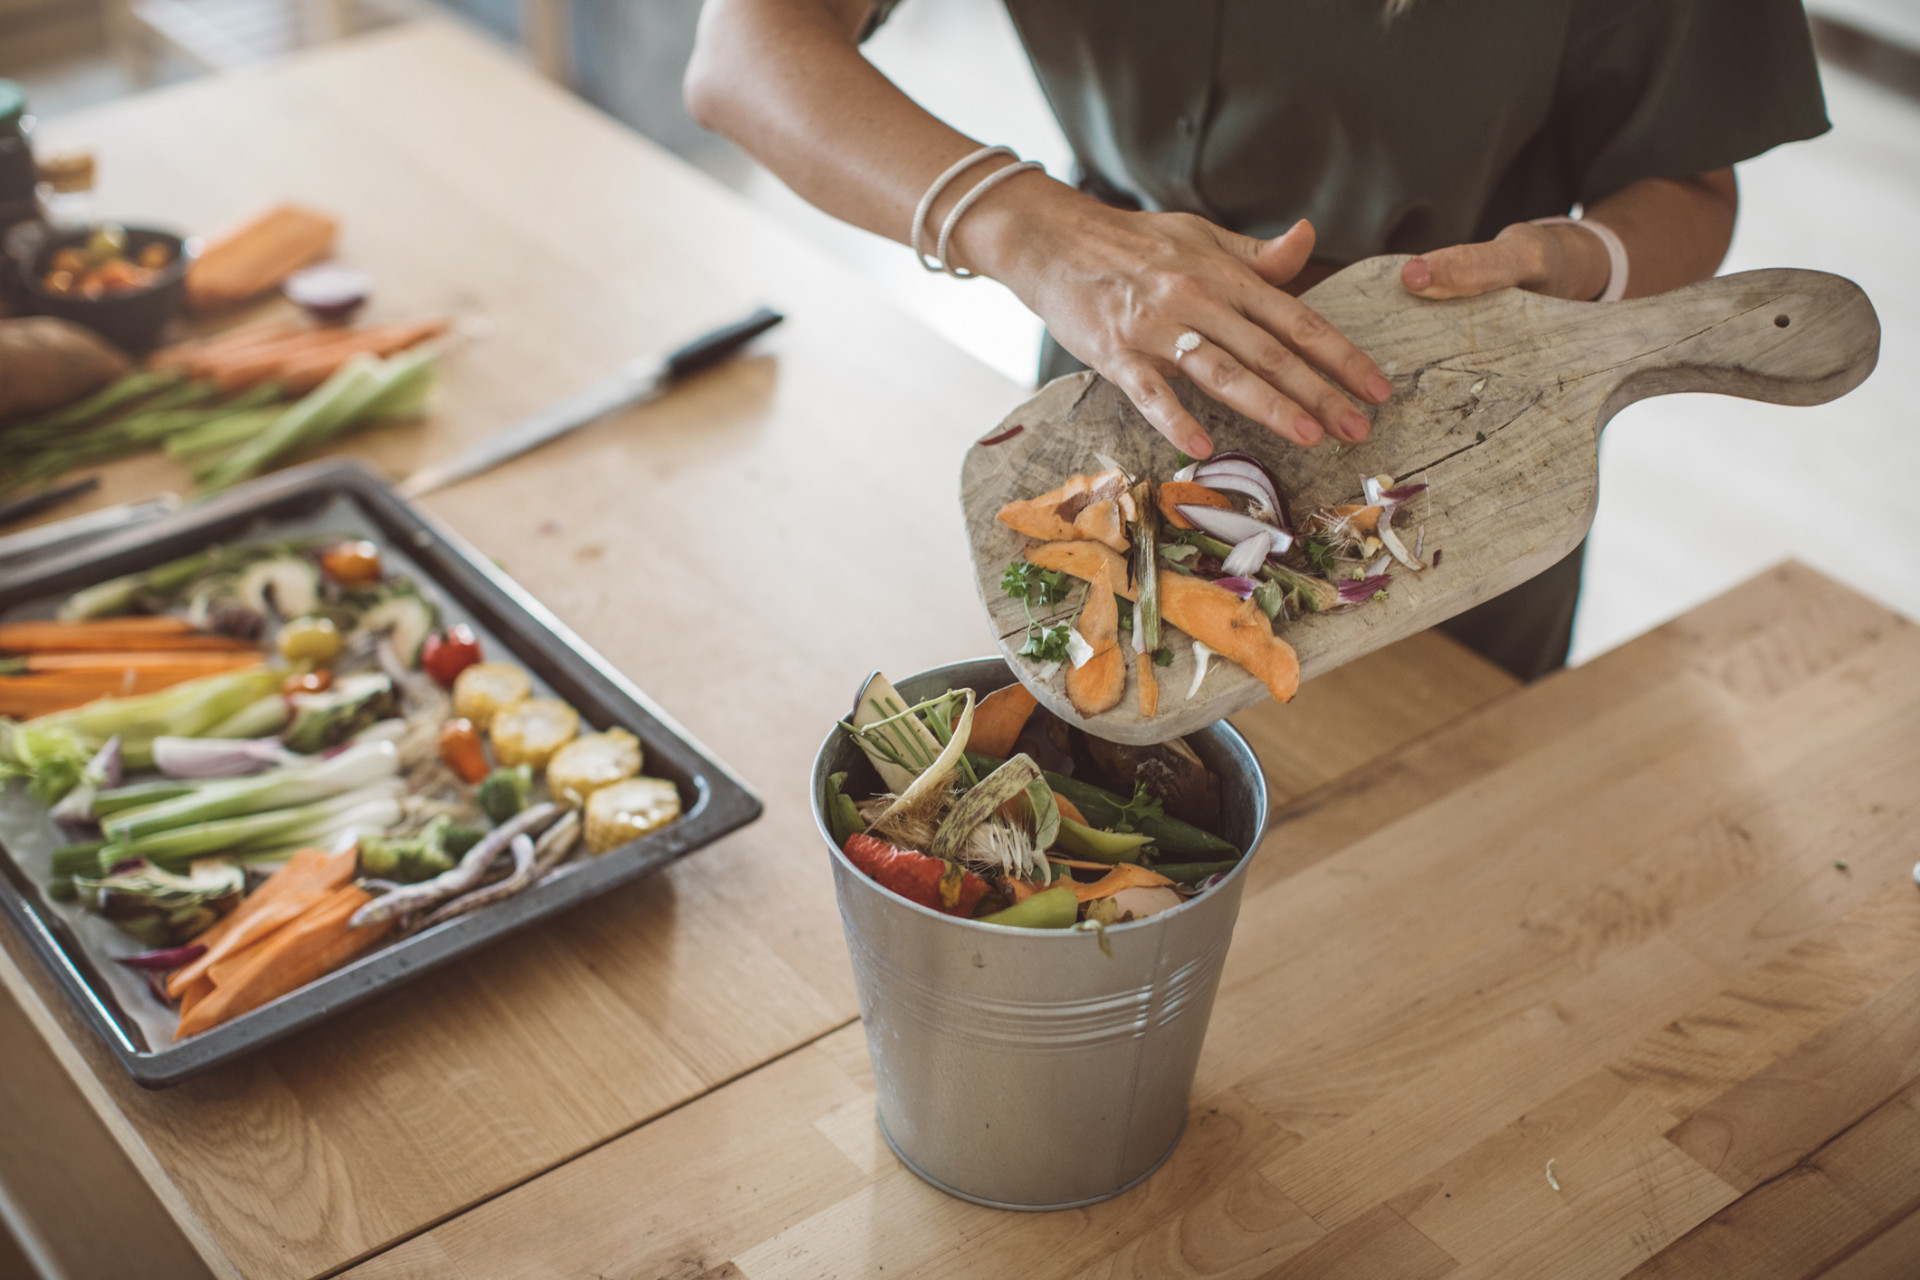 Why do restaurants throw away food may be caused by a lack of food waste management